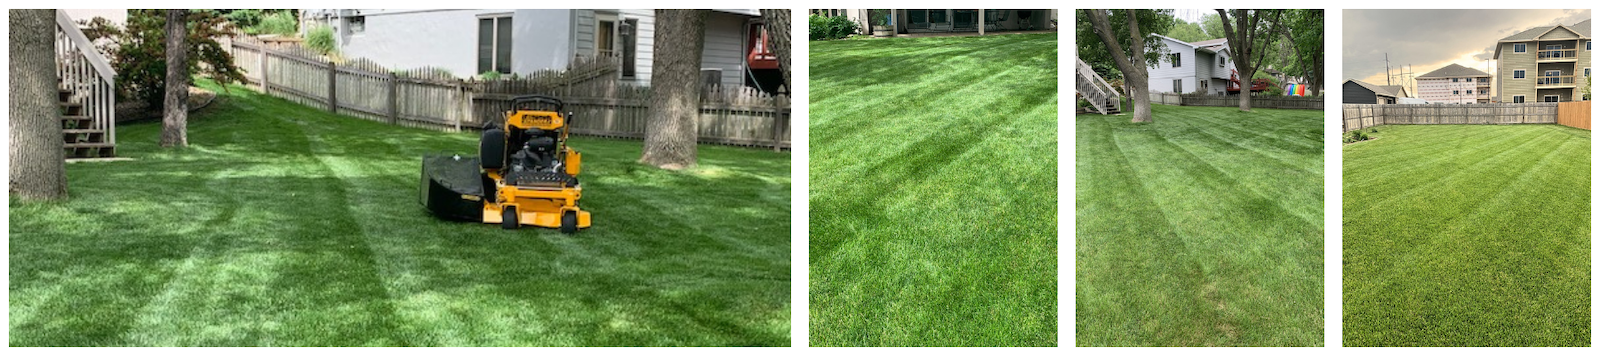 lawn care jobs in Sioux Falls